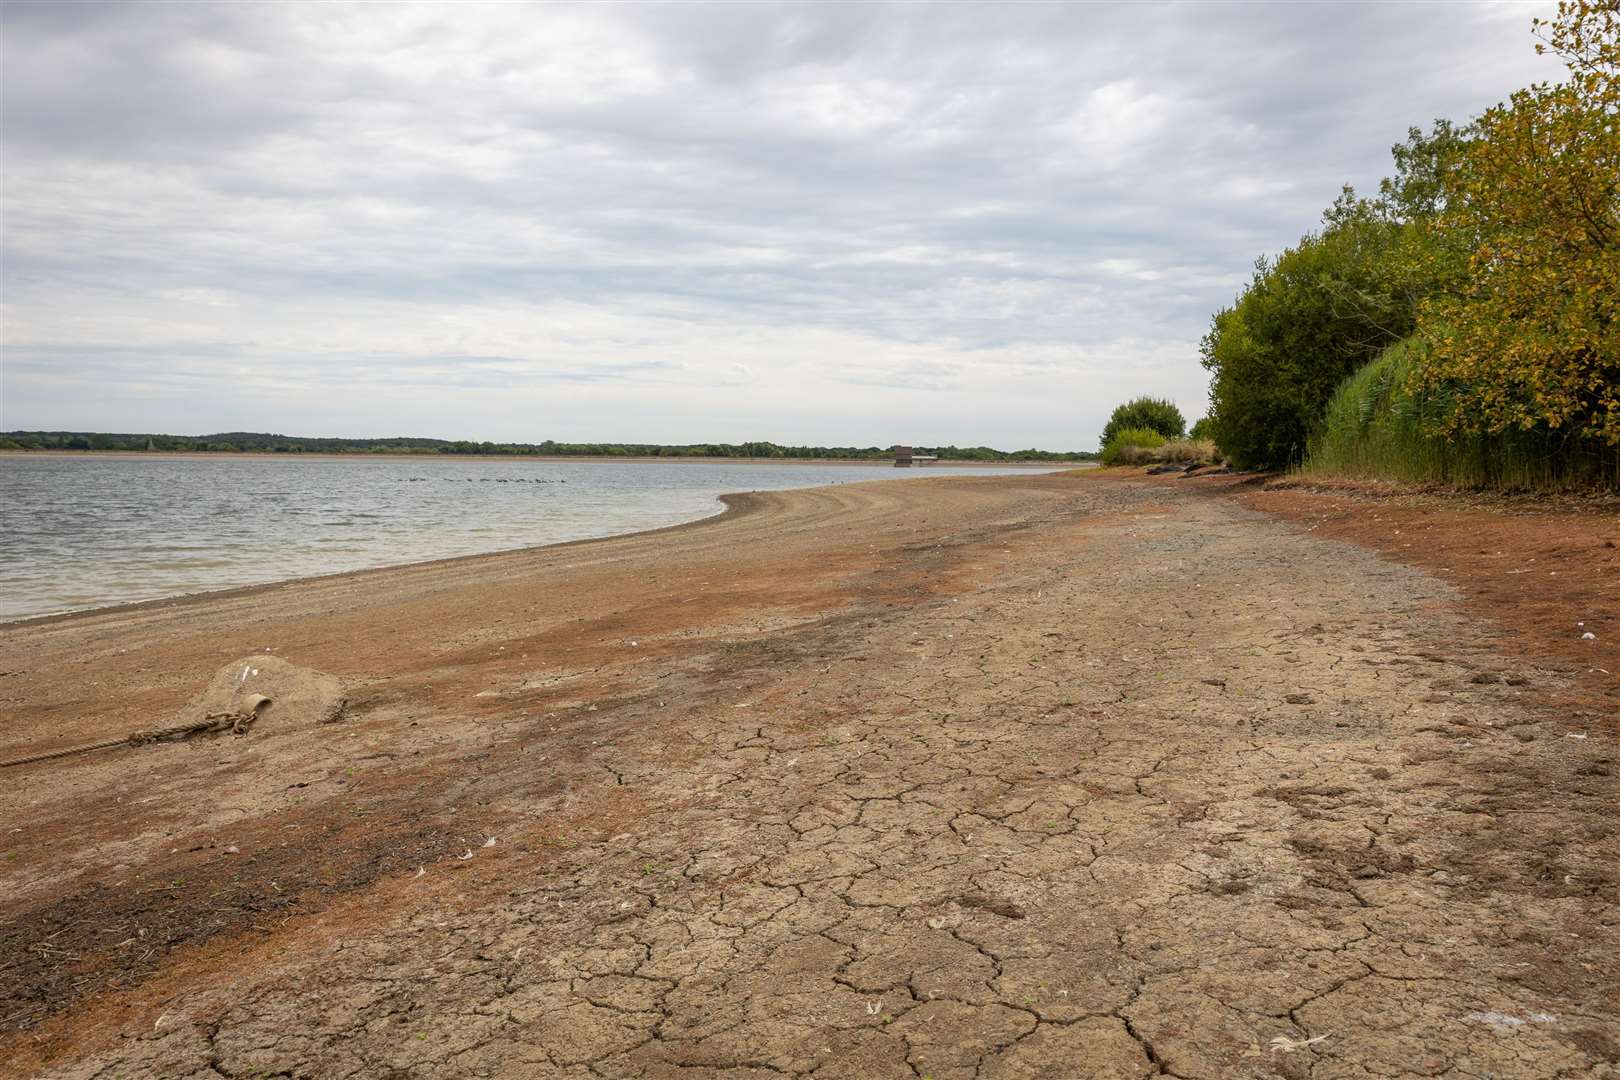 Low water supplies led to drought-like conditions for many areas last summer